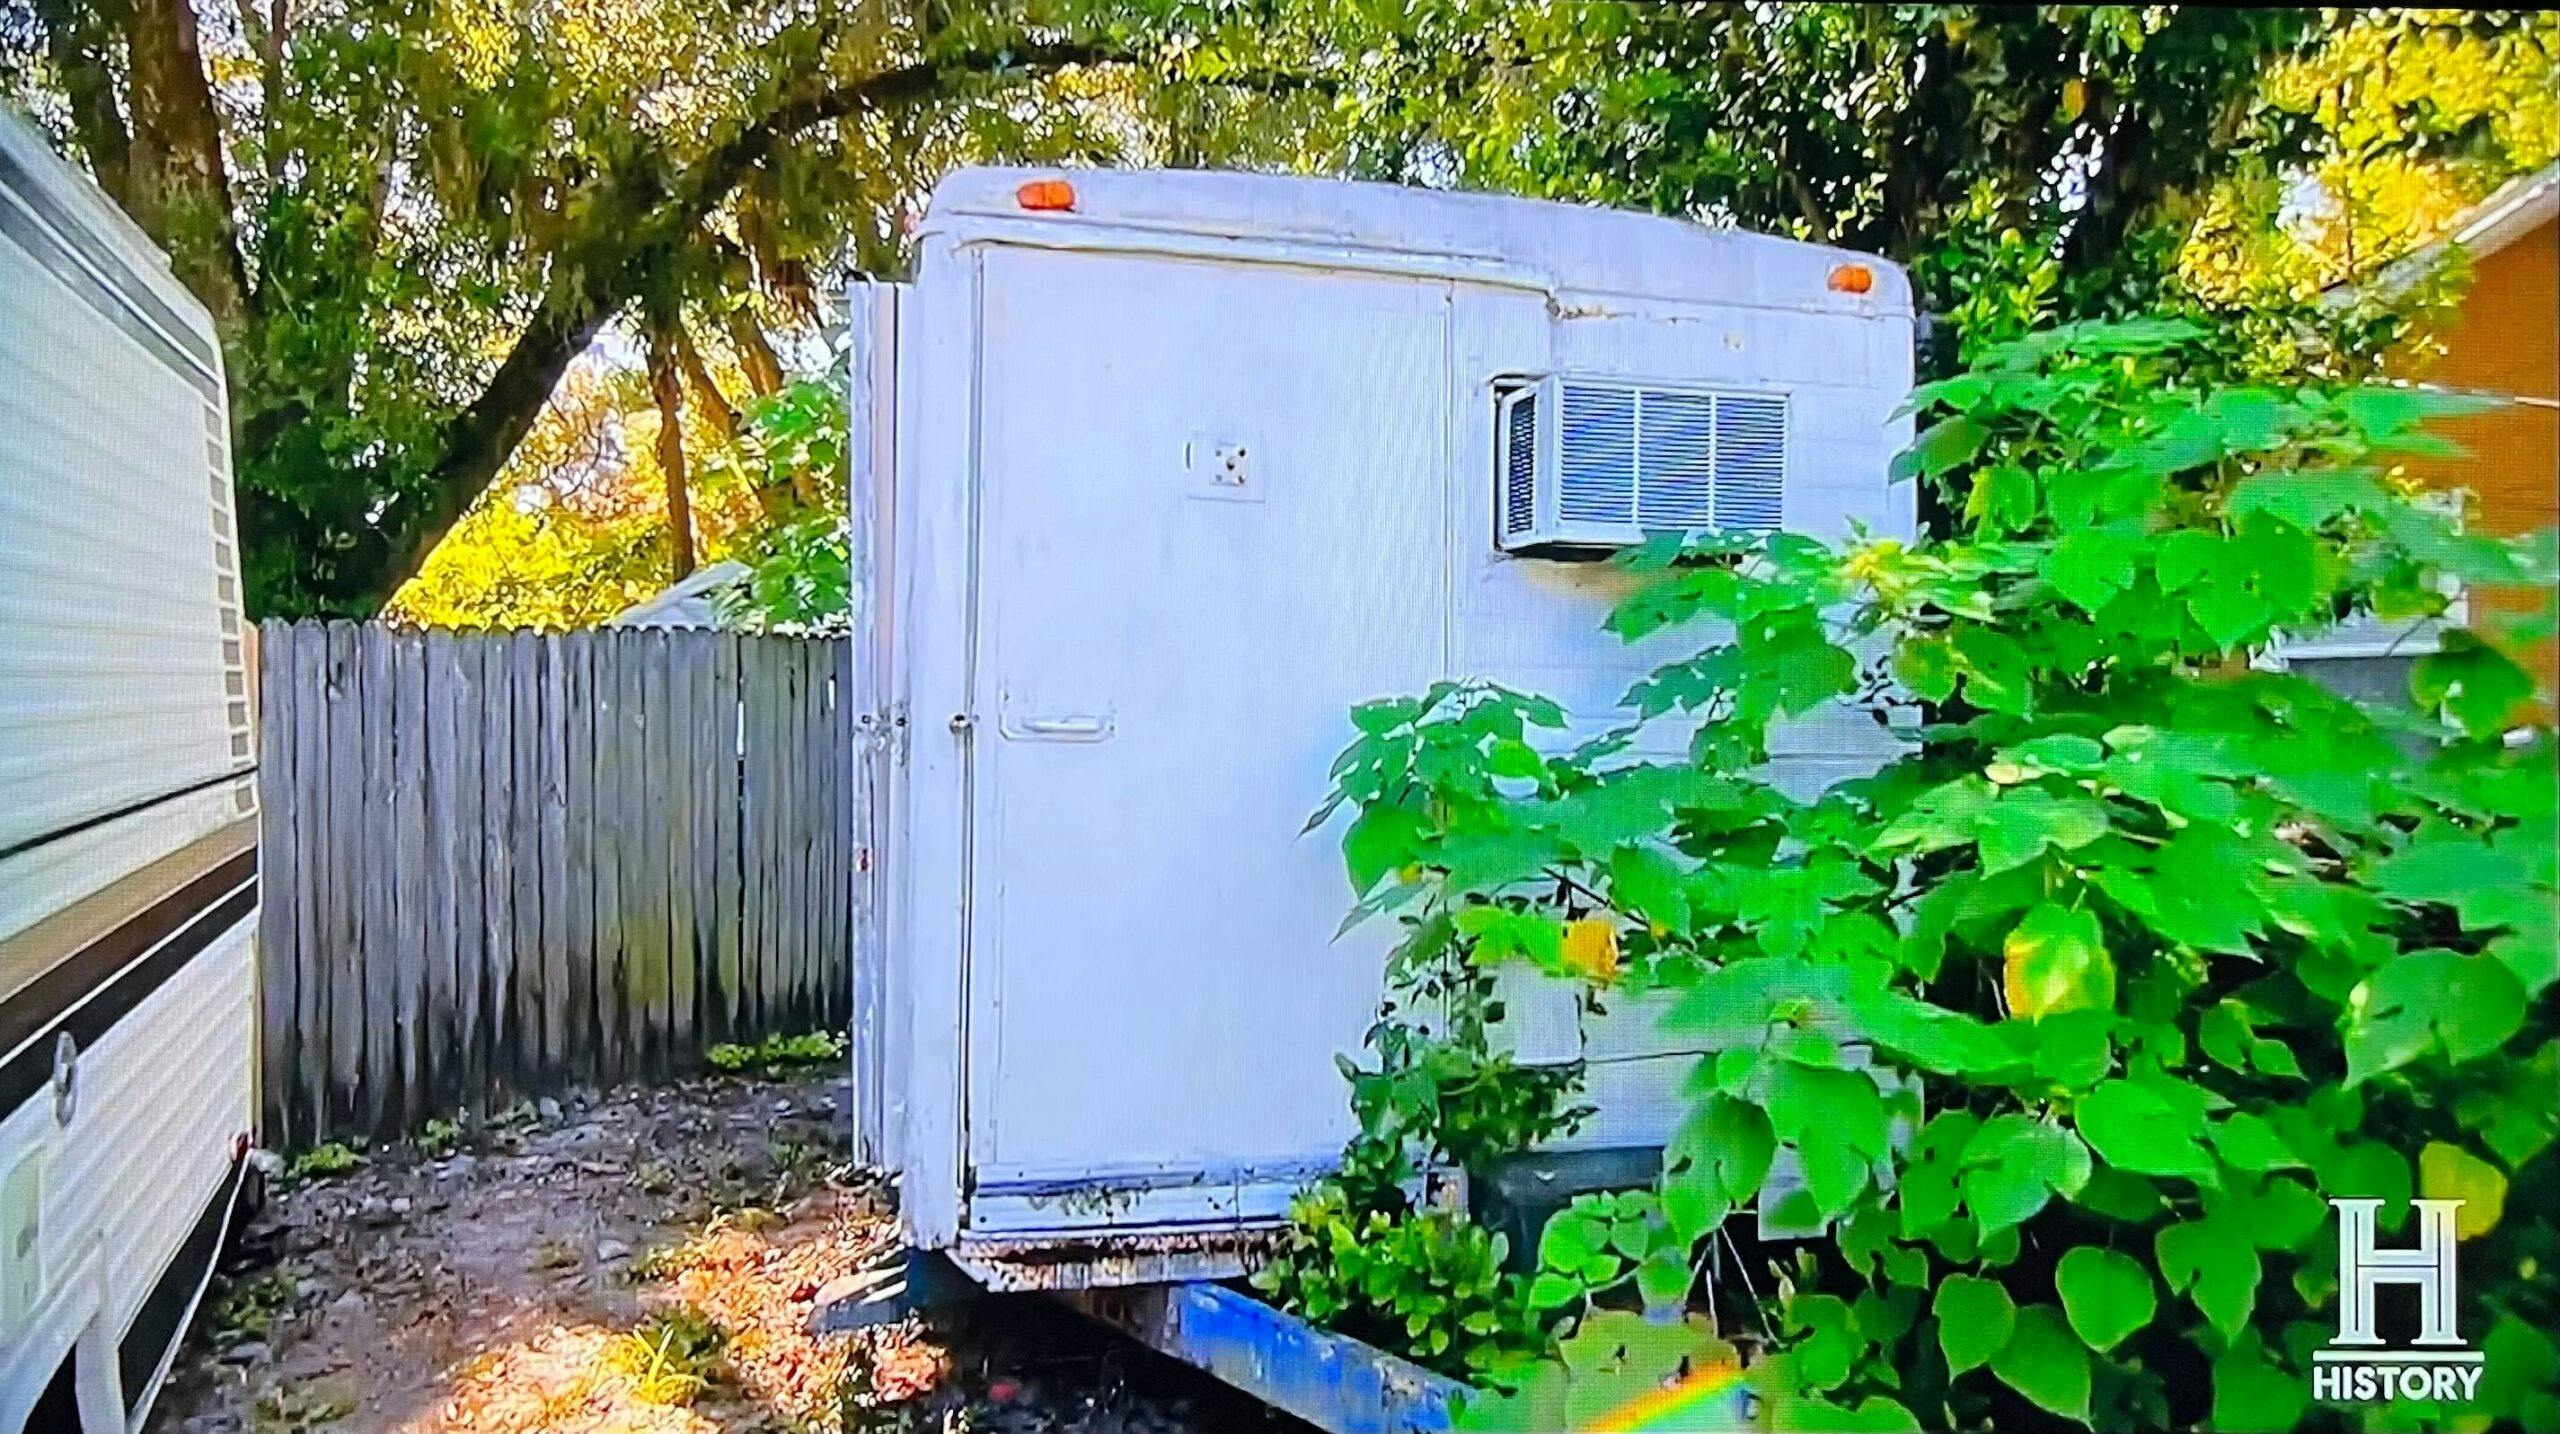 american pickers music studio trailer parked